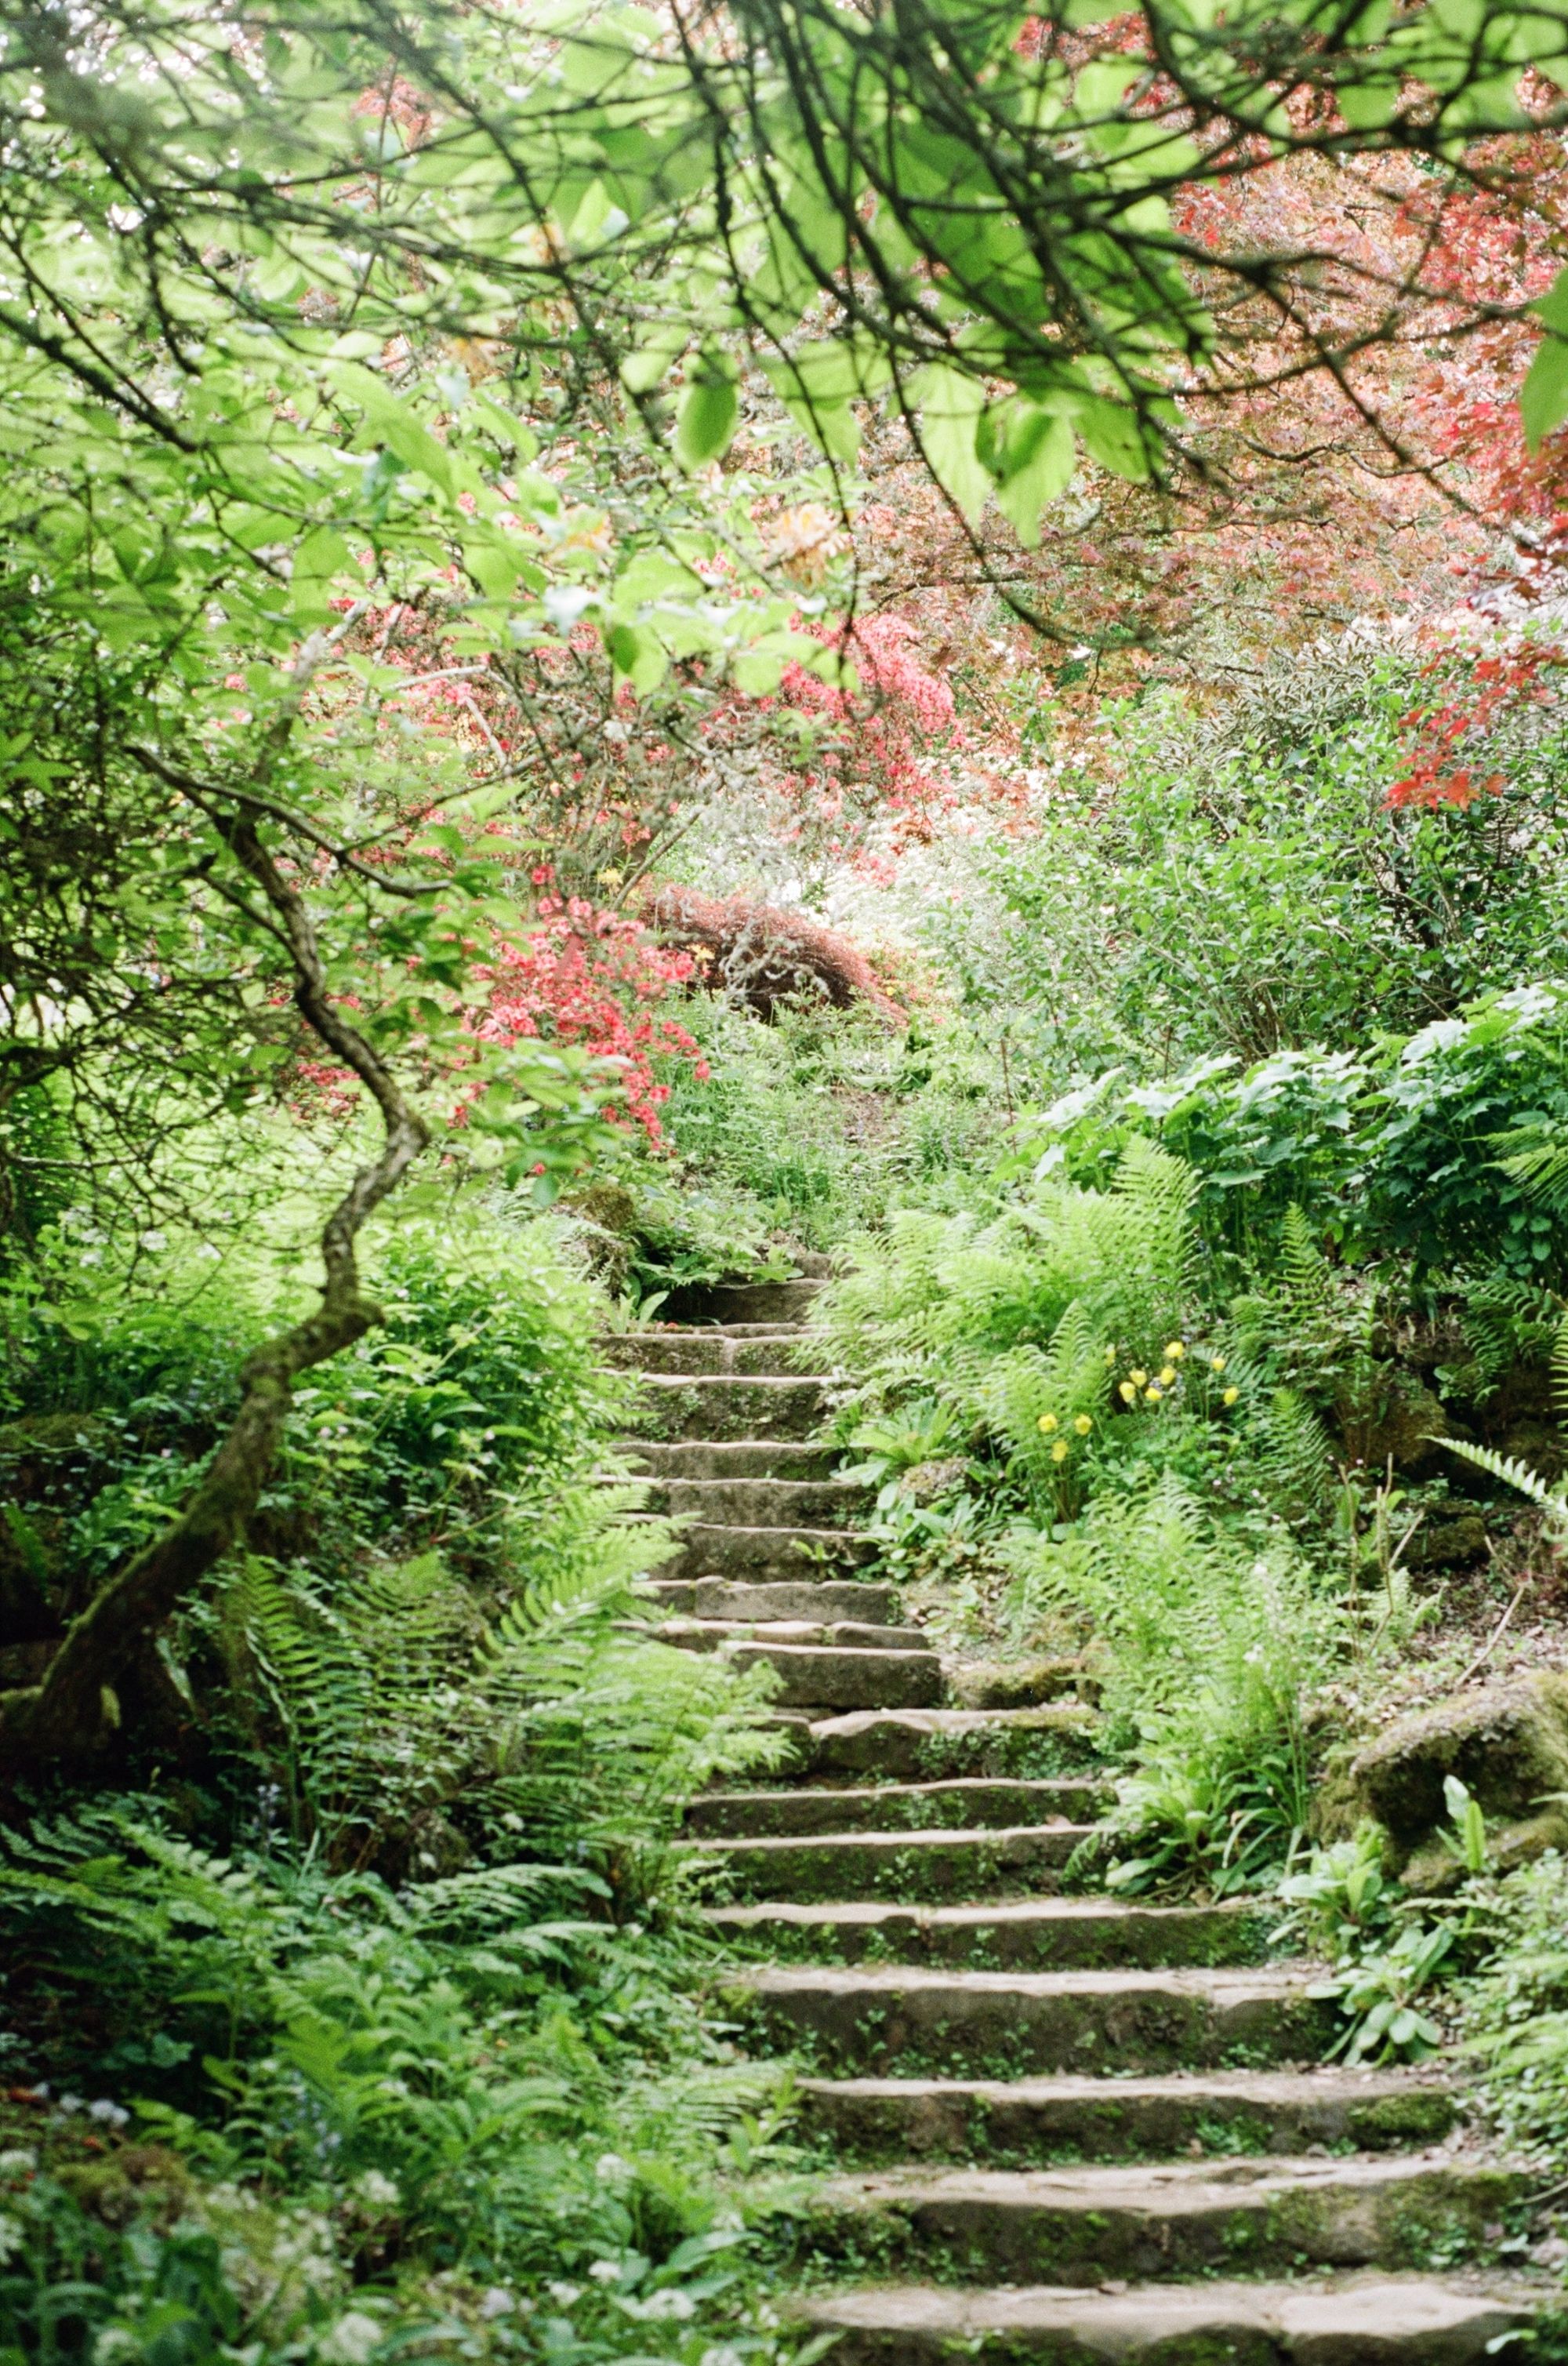 A stone staircase leading up through ferns and trees towards some beautiful red foliage.